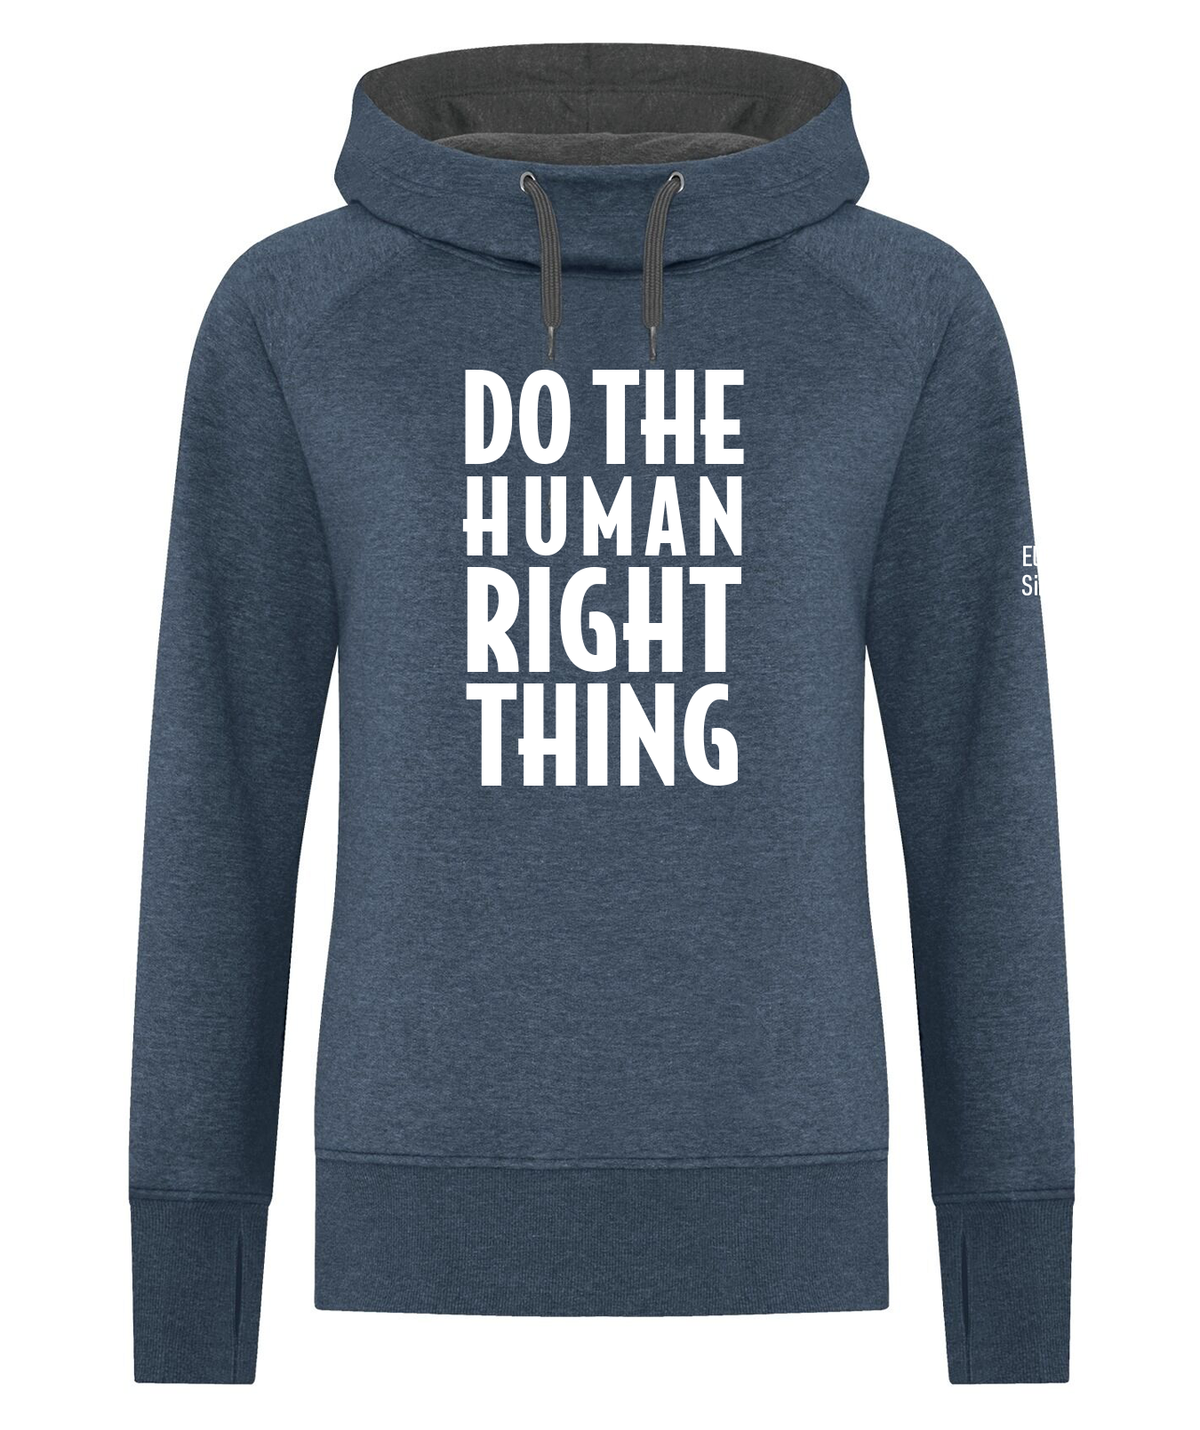 Elizabeth Fry Ladies Hoodie - Do The Right Human Thing